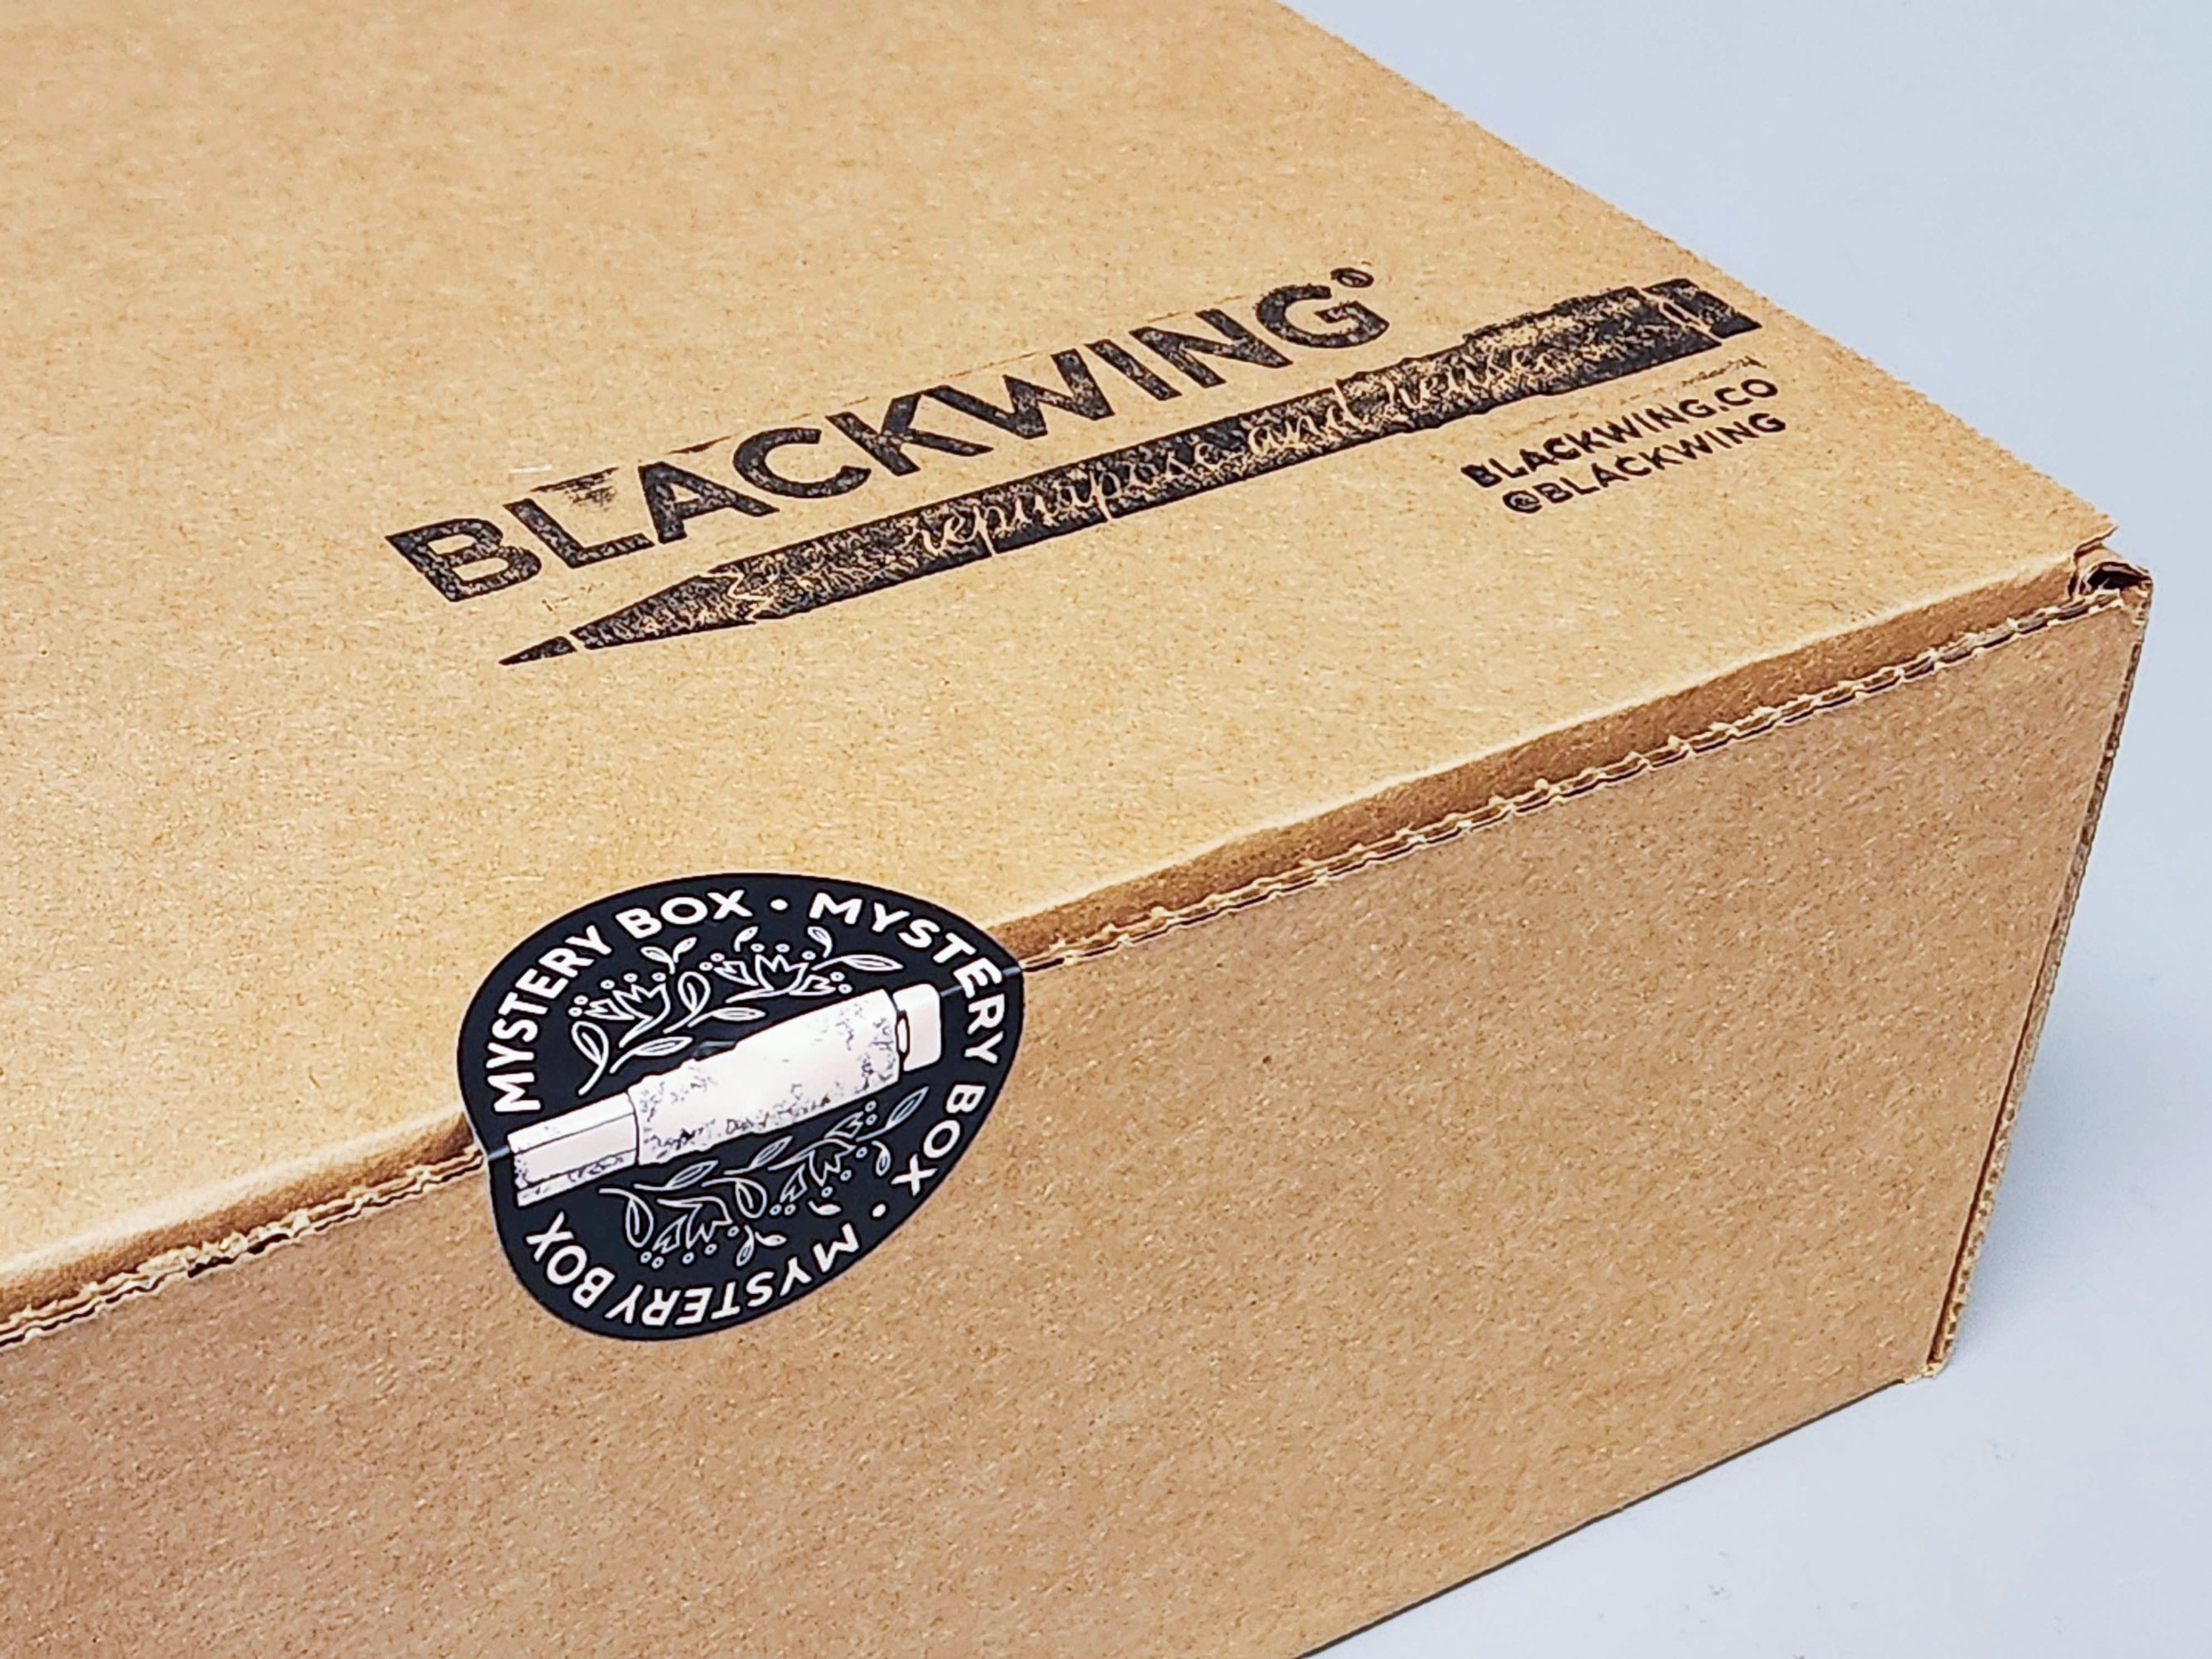 A brown Blackwing Mystery Box with a Blackwing logo on it.